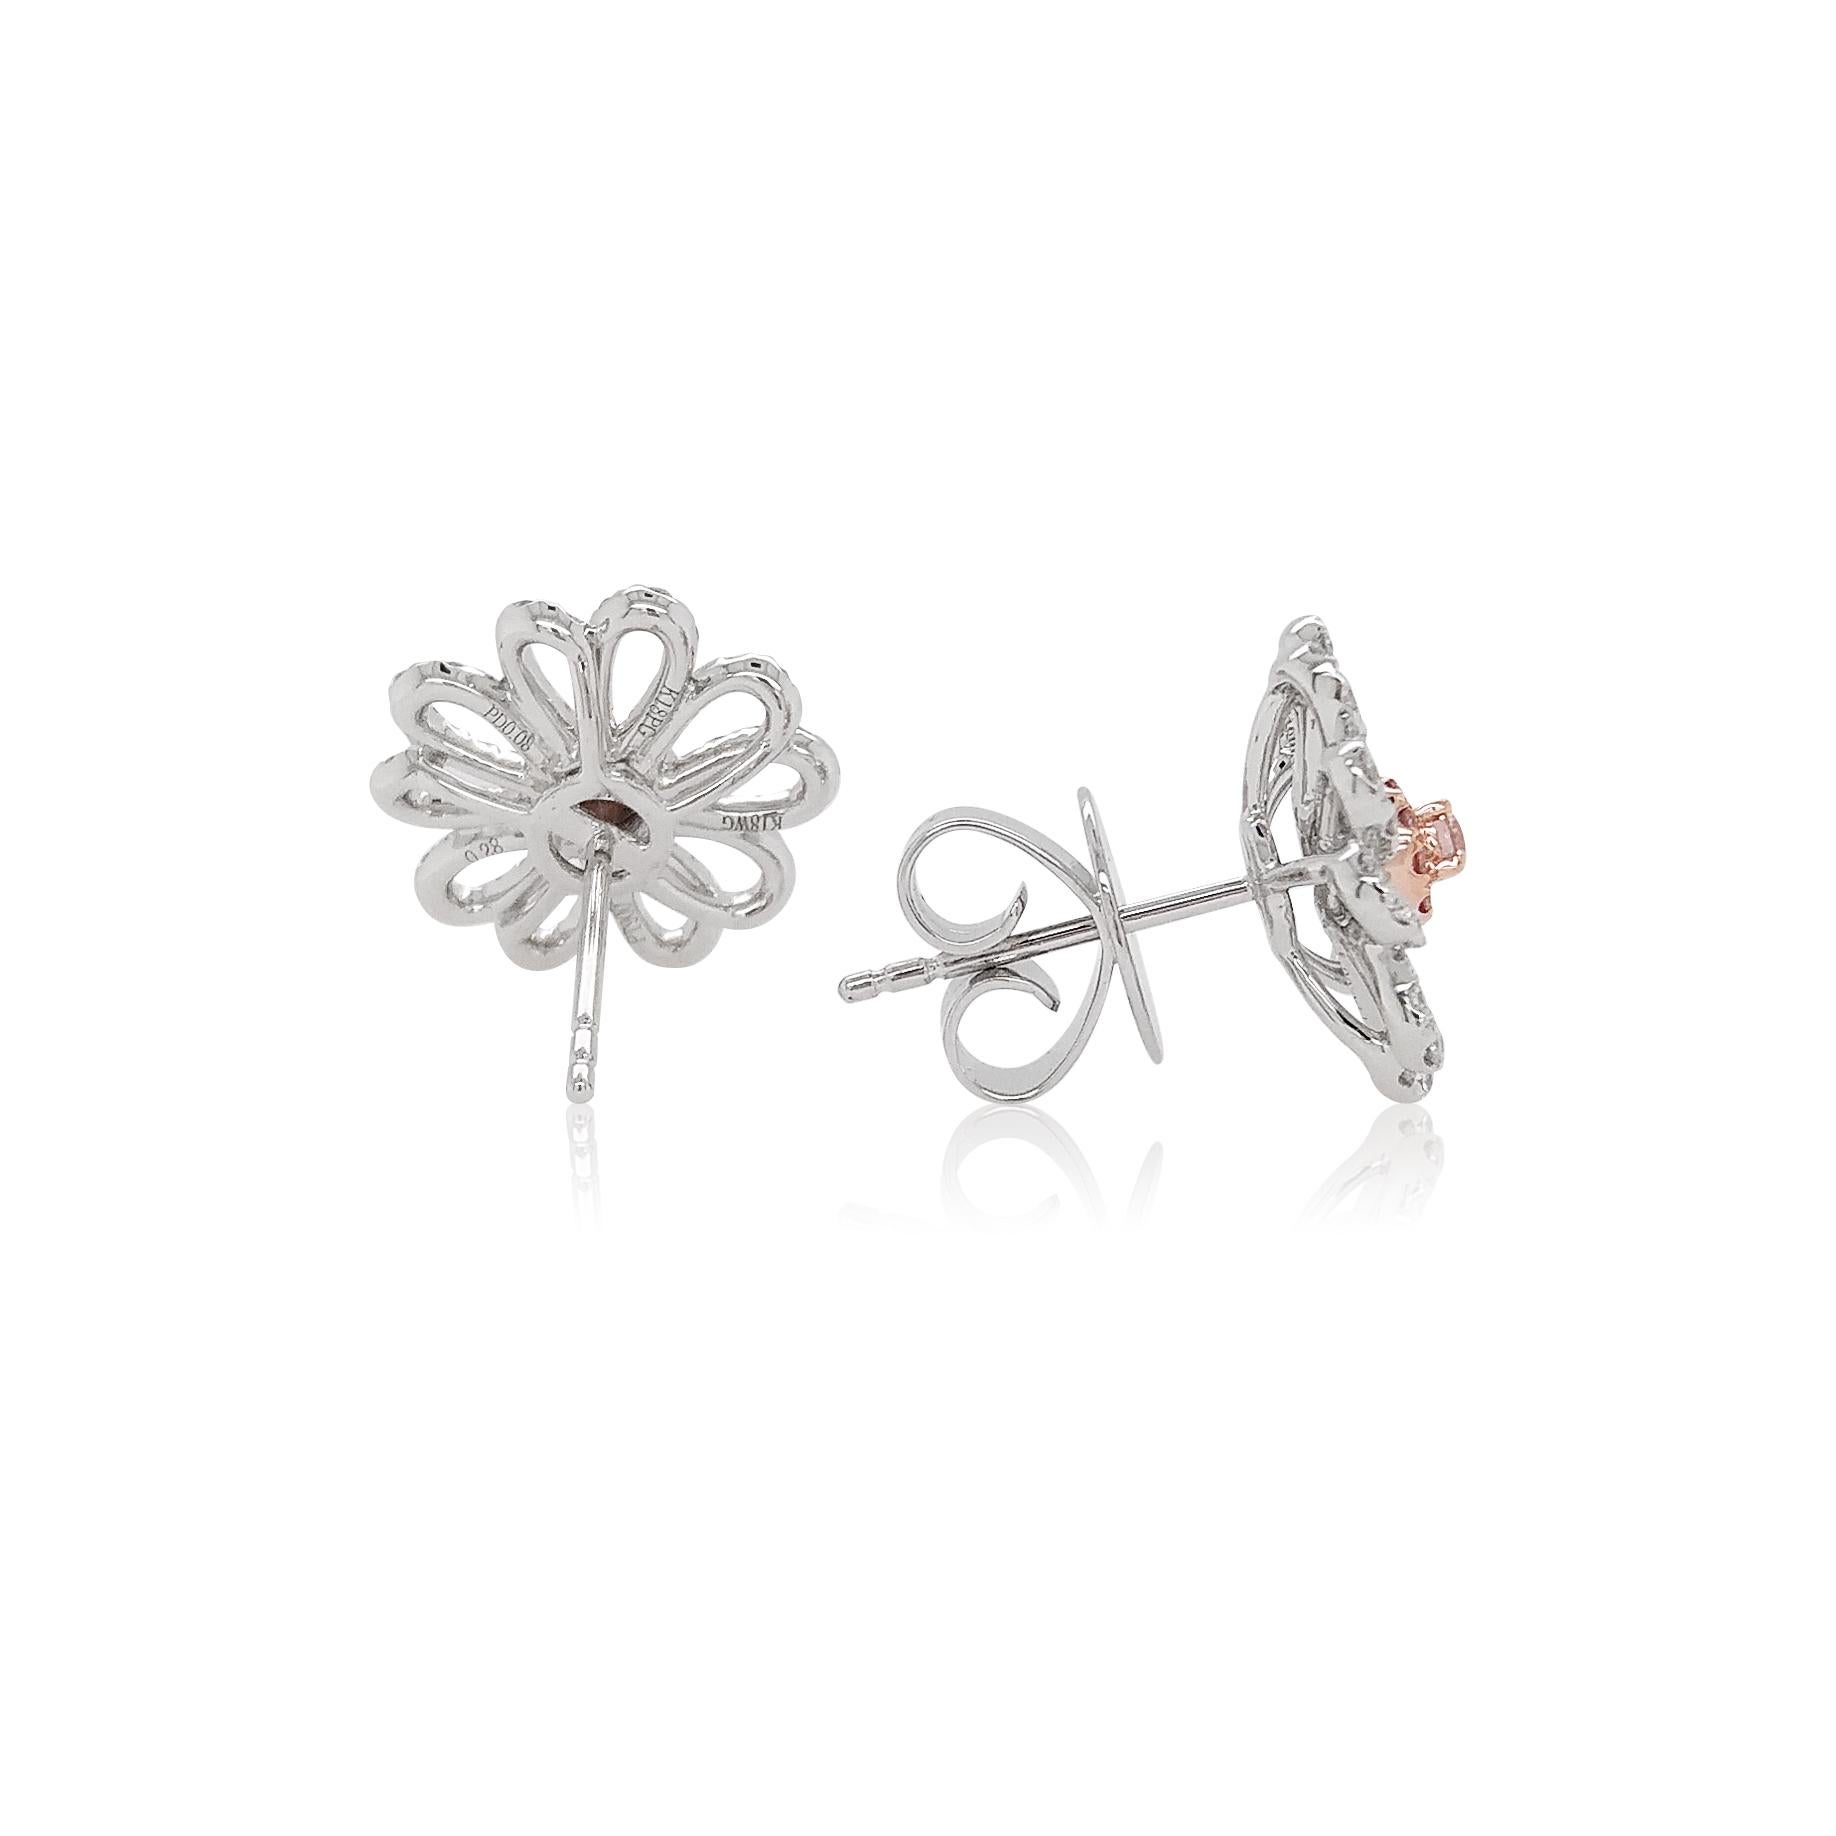 These platinum earrings offer a subtle twist on a classic design. Featuring soft Argyle pink diamonds surrounded by a floral diamond motif, these pretty earrings will add a touch of elegance to any outfit. A fantastic addition to any jewelry box,